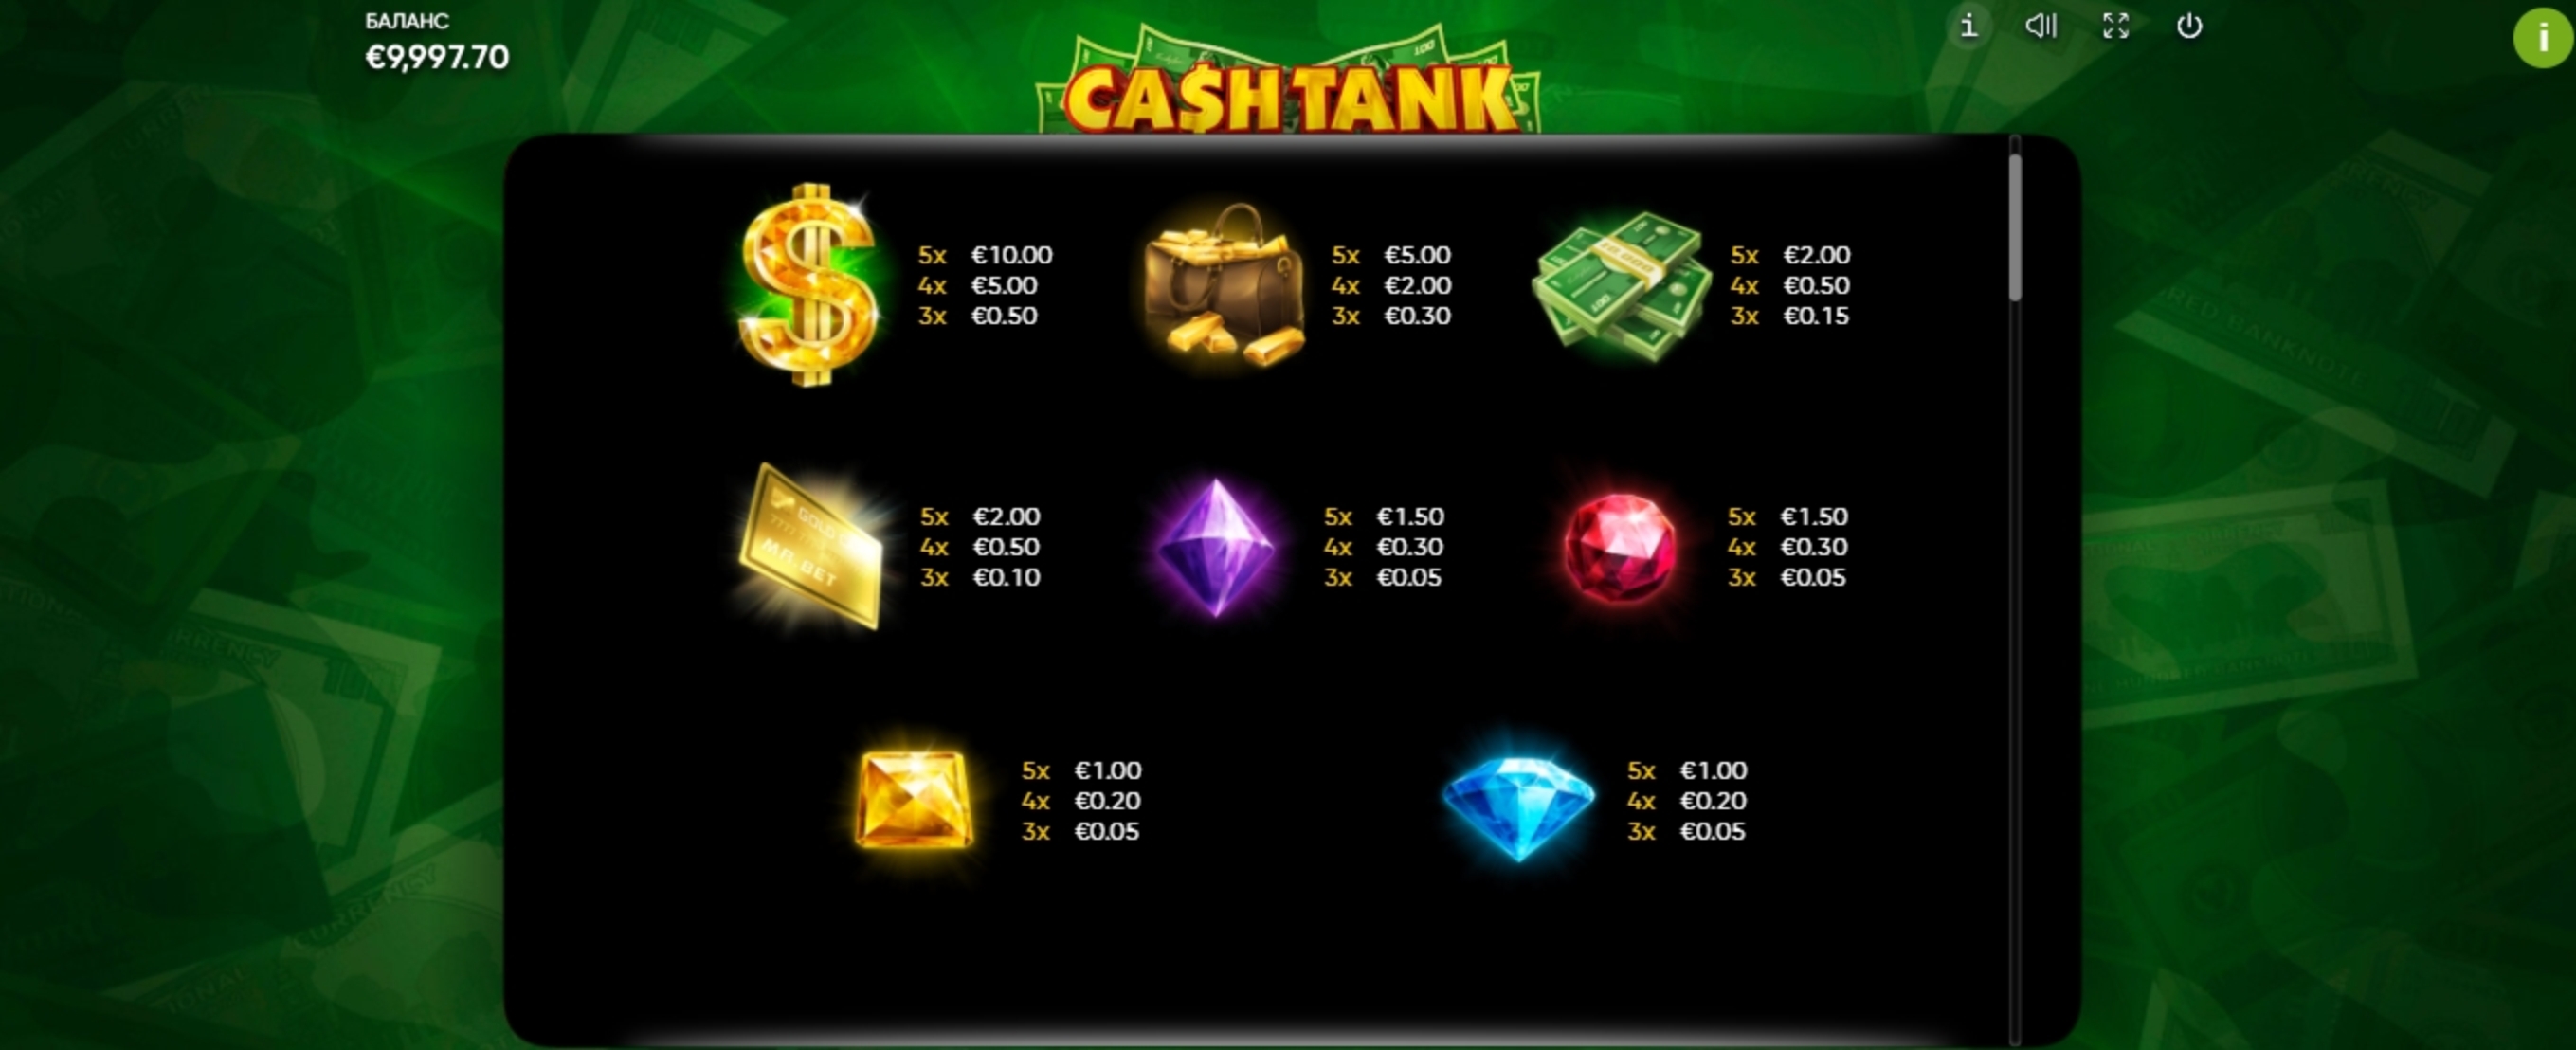 Info of Cash Tank Slot Game by Endorphina